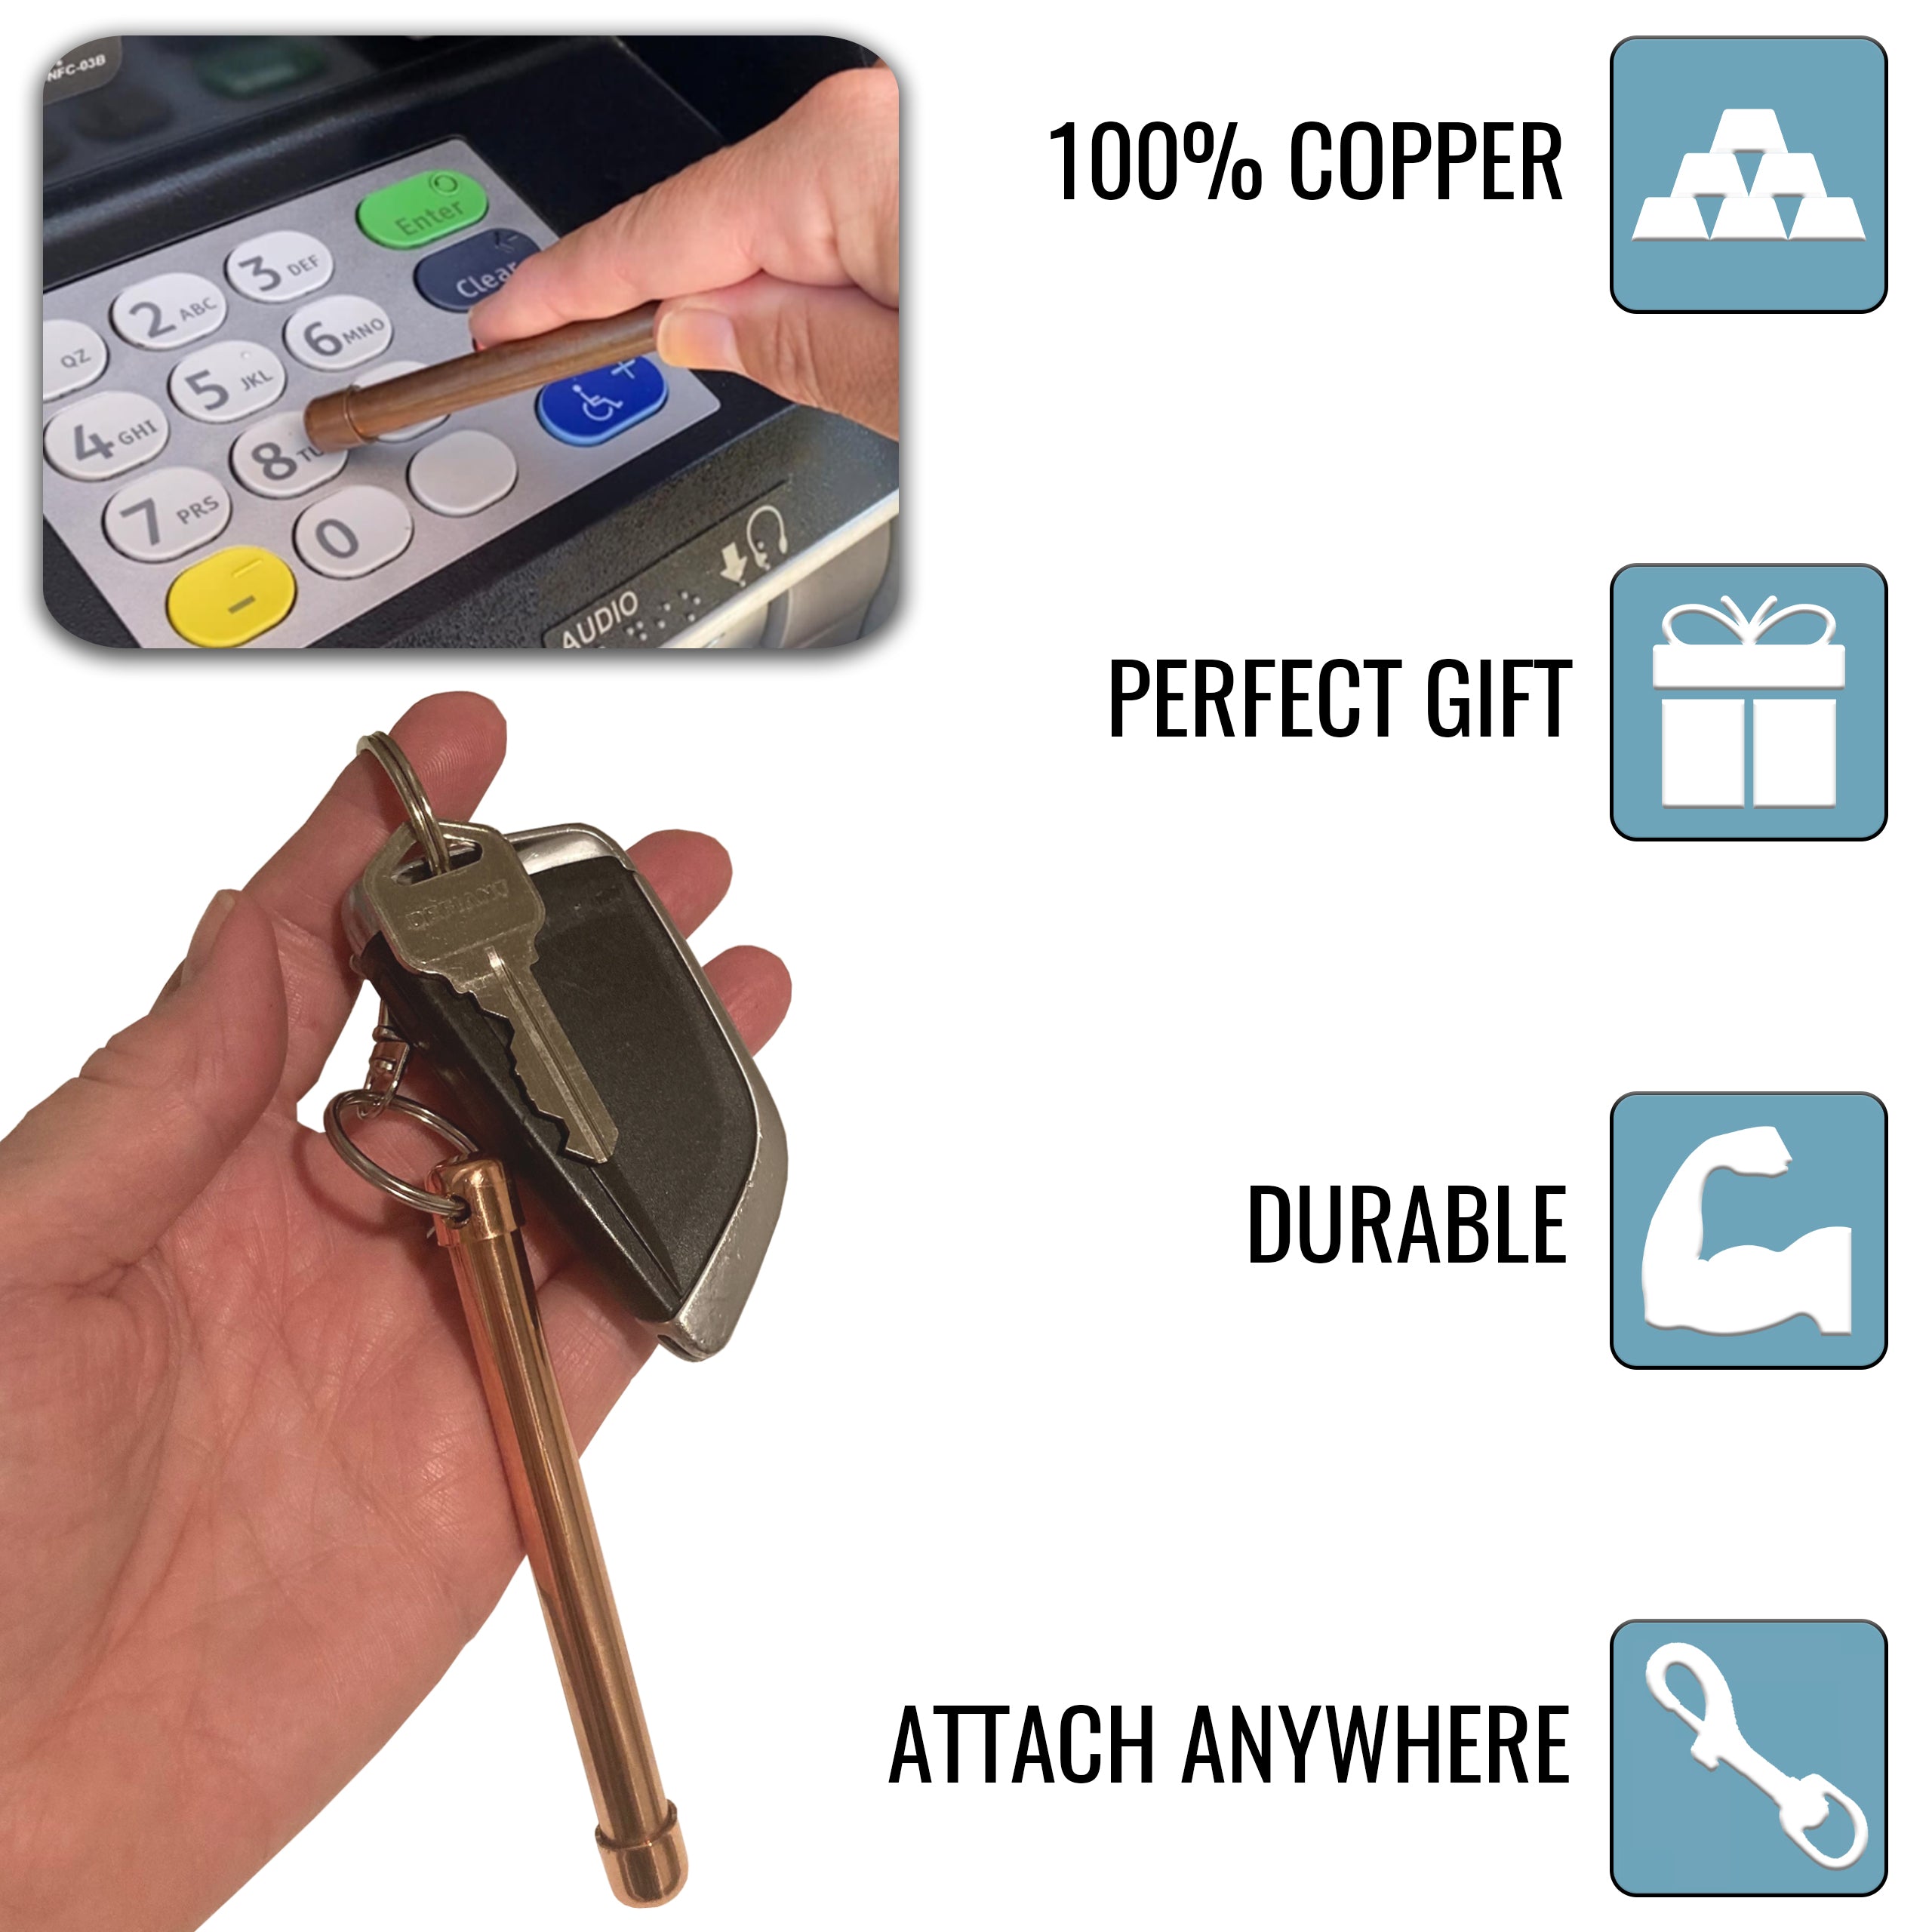 100% Copper  Perfect Gift  Durable  Attach Anywhere  Shows hand using the 4" Magic Wand Hand Roller to push keys on an ATM and shows car keys attached to Magic Wand Hand Roller. Roll between hands to kill 99.97% of bacteria, virus, and germs.  All Natural Hand Sanitizers, Chemical Free, Lasts Forever. Will not chap hands or make sore. Recyclable. EPA registered. Patented